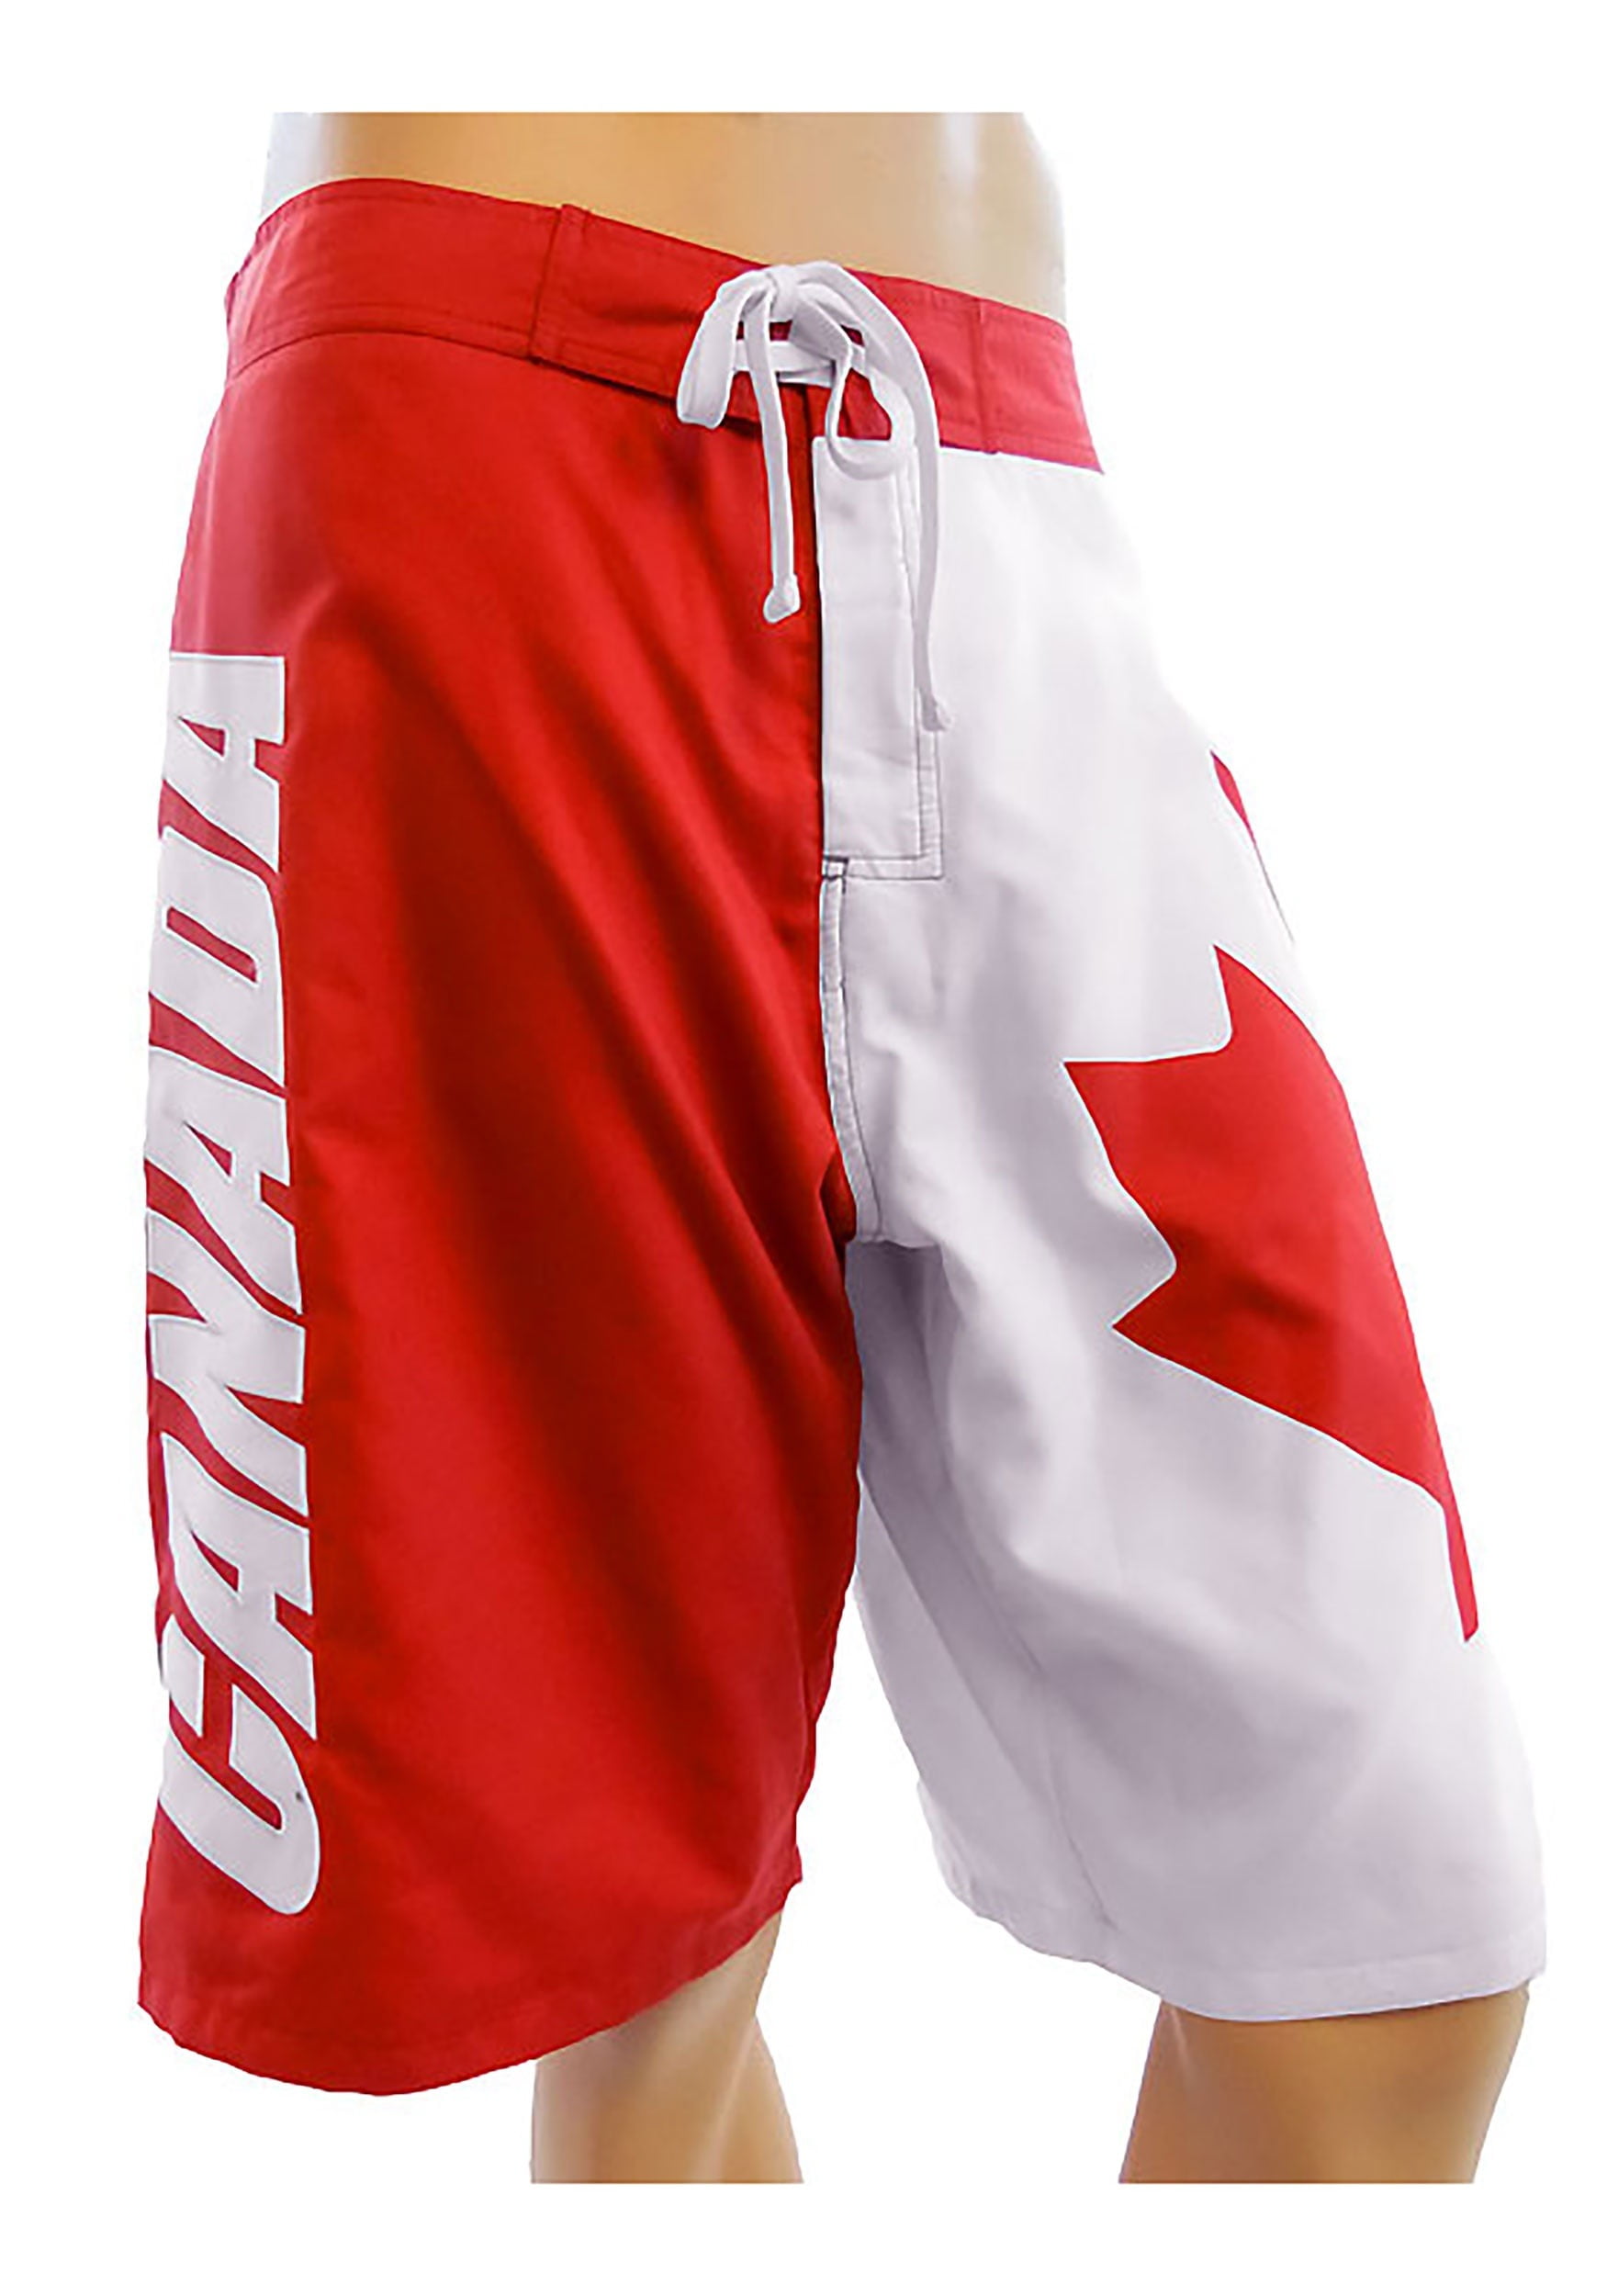 Canadian Flag Mens Cute Beach Swim Trunks Quick Dry Board Shorts with Mesh Lining